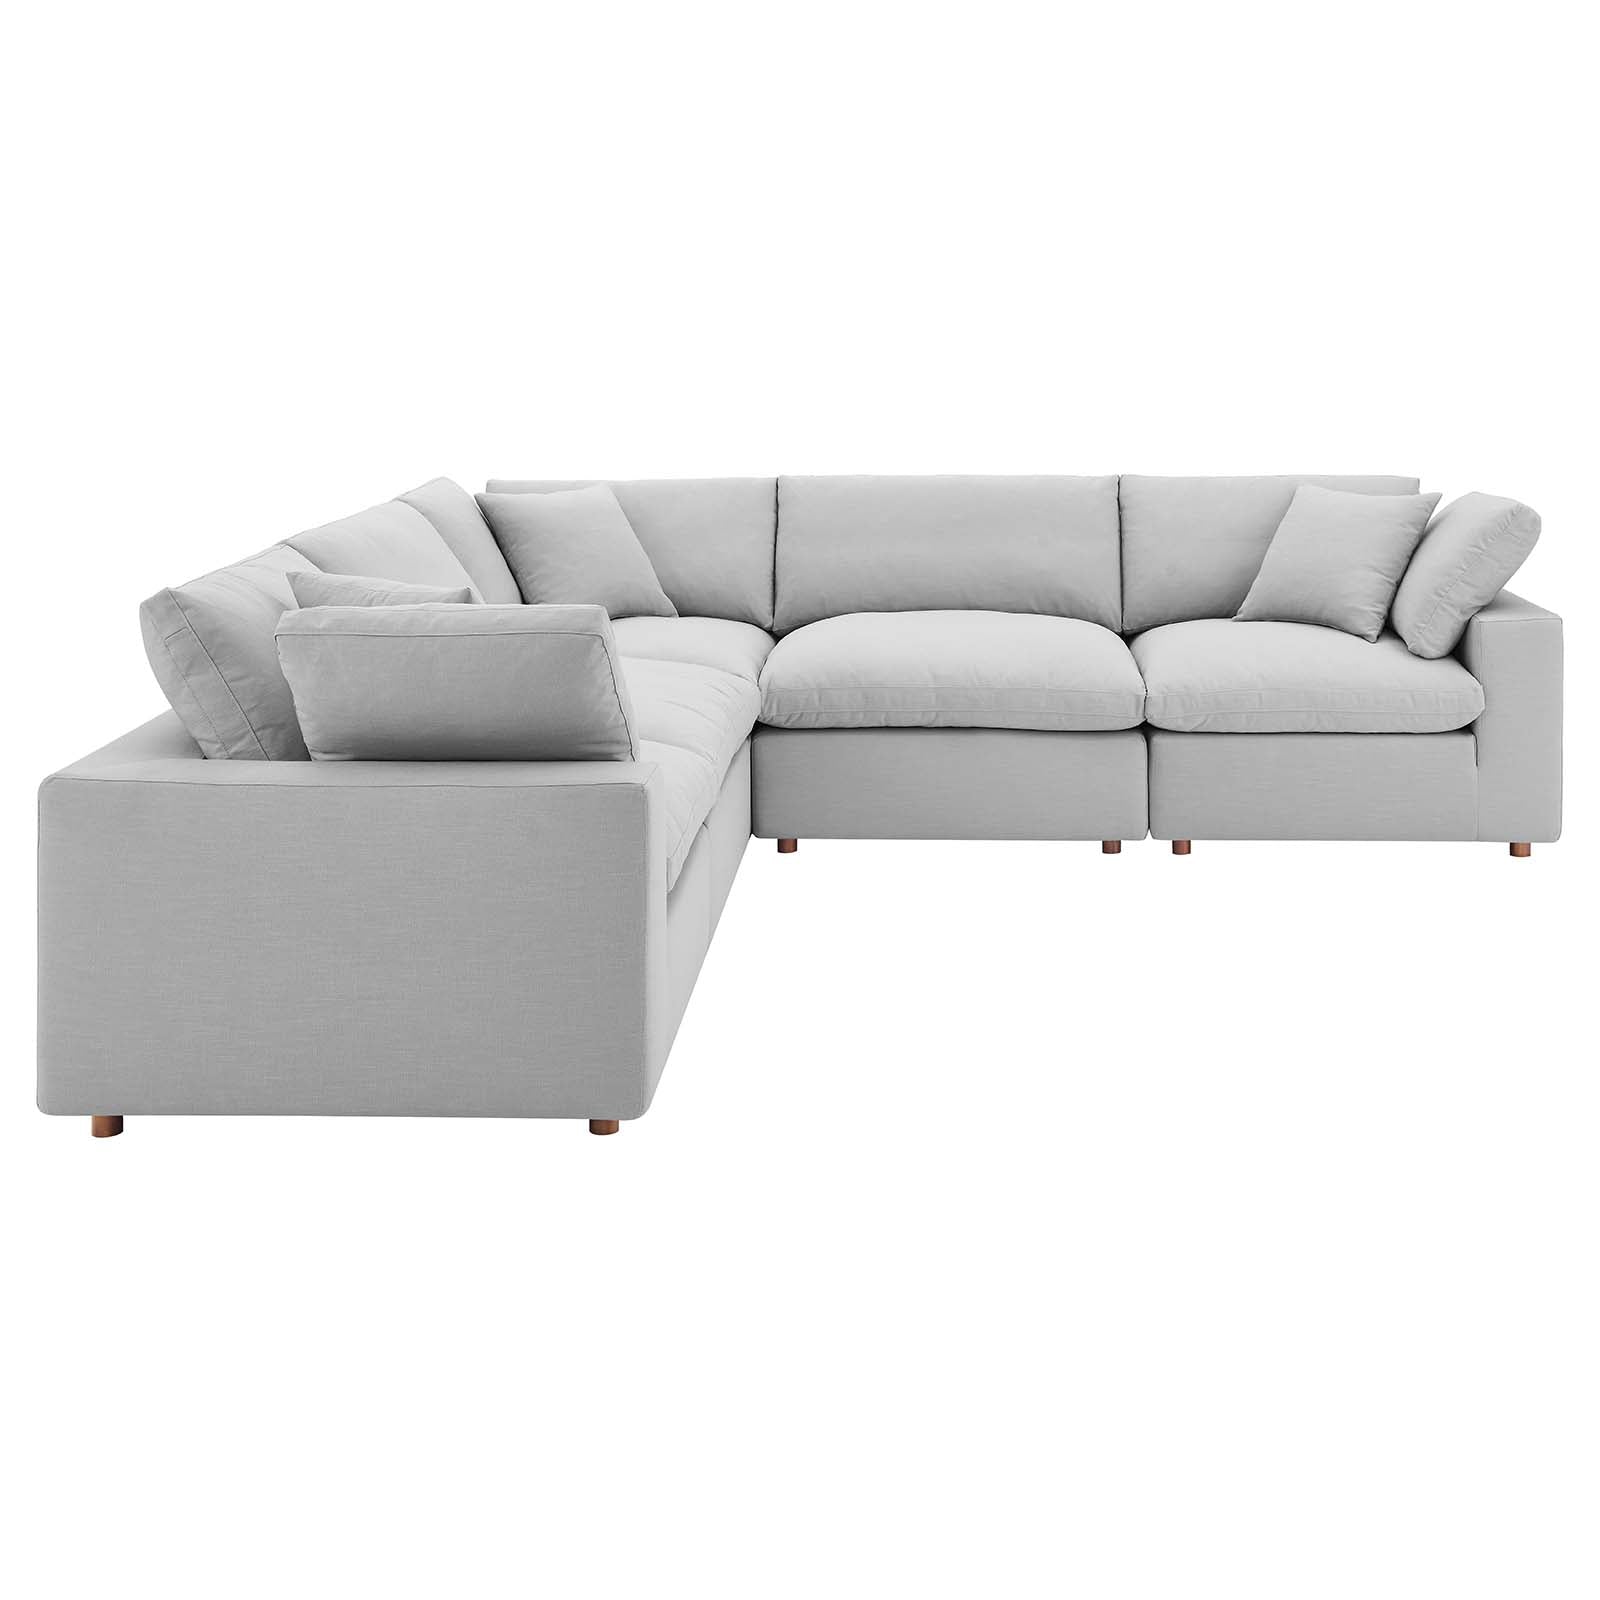 Modway Sectional Sofas - Commix Down Filled Overstuffed 5 Piece 5-Piece Sectional Sofa Light Gray